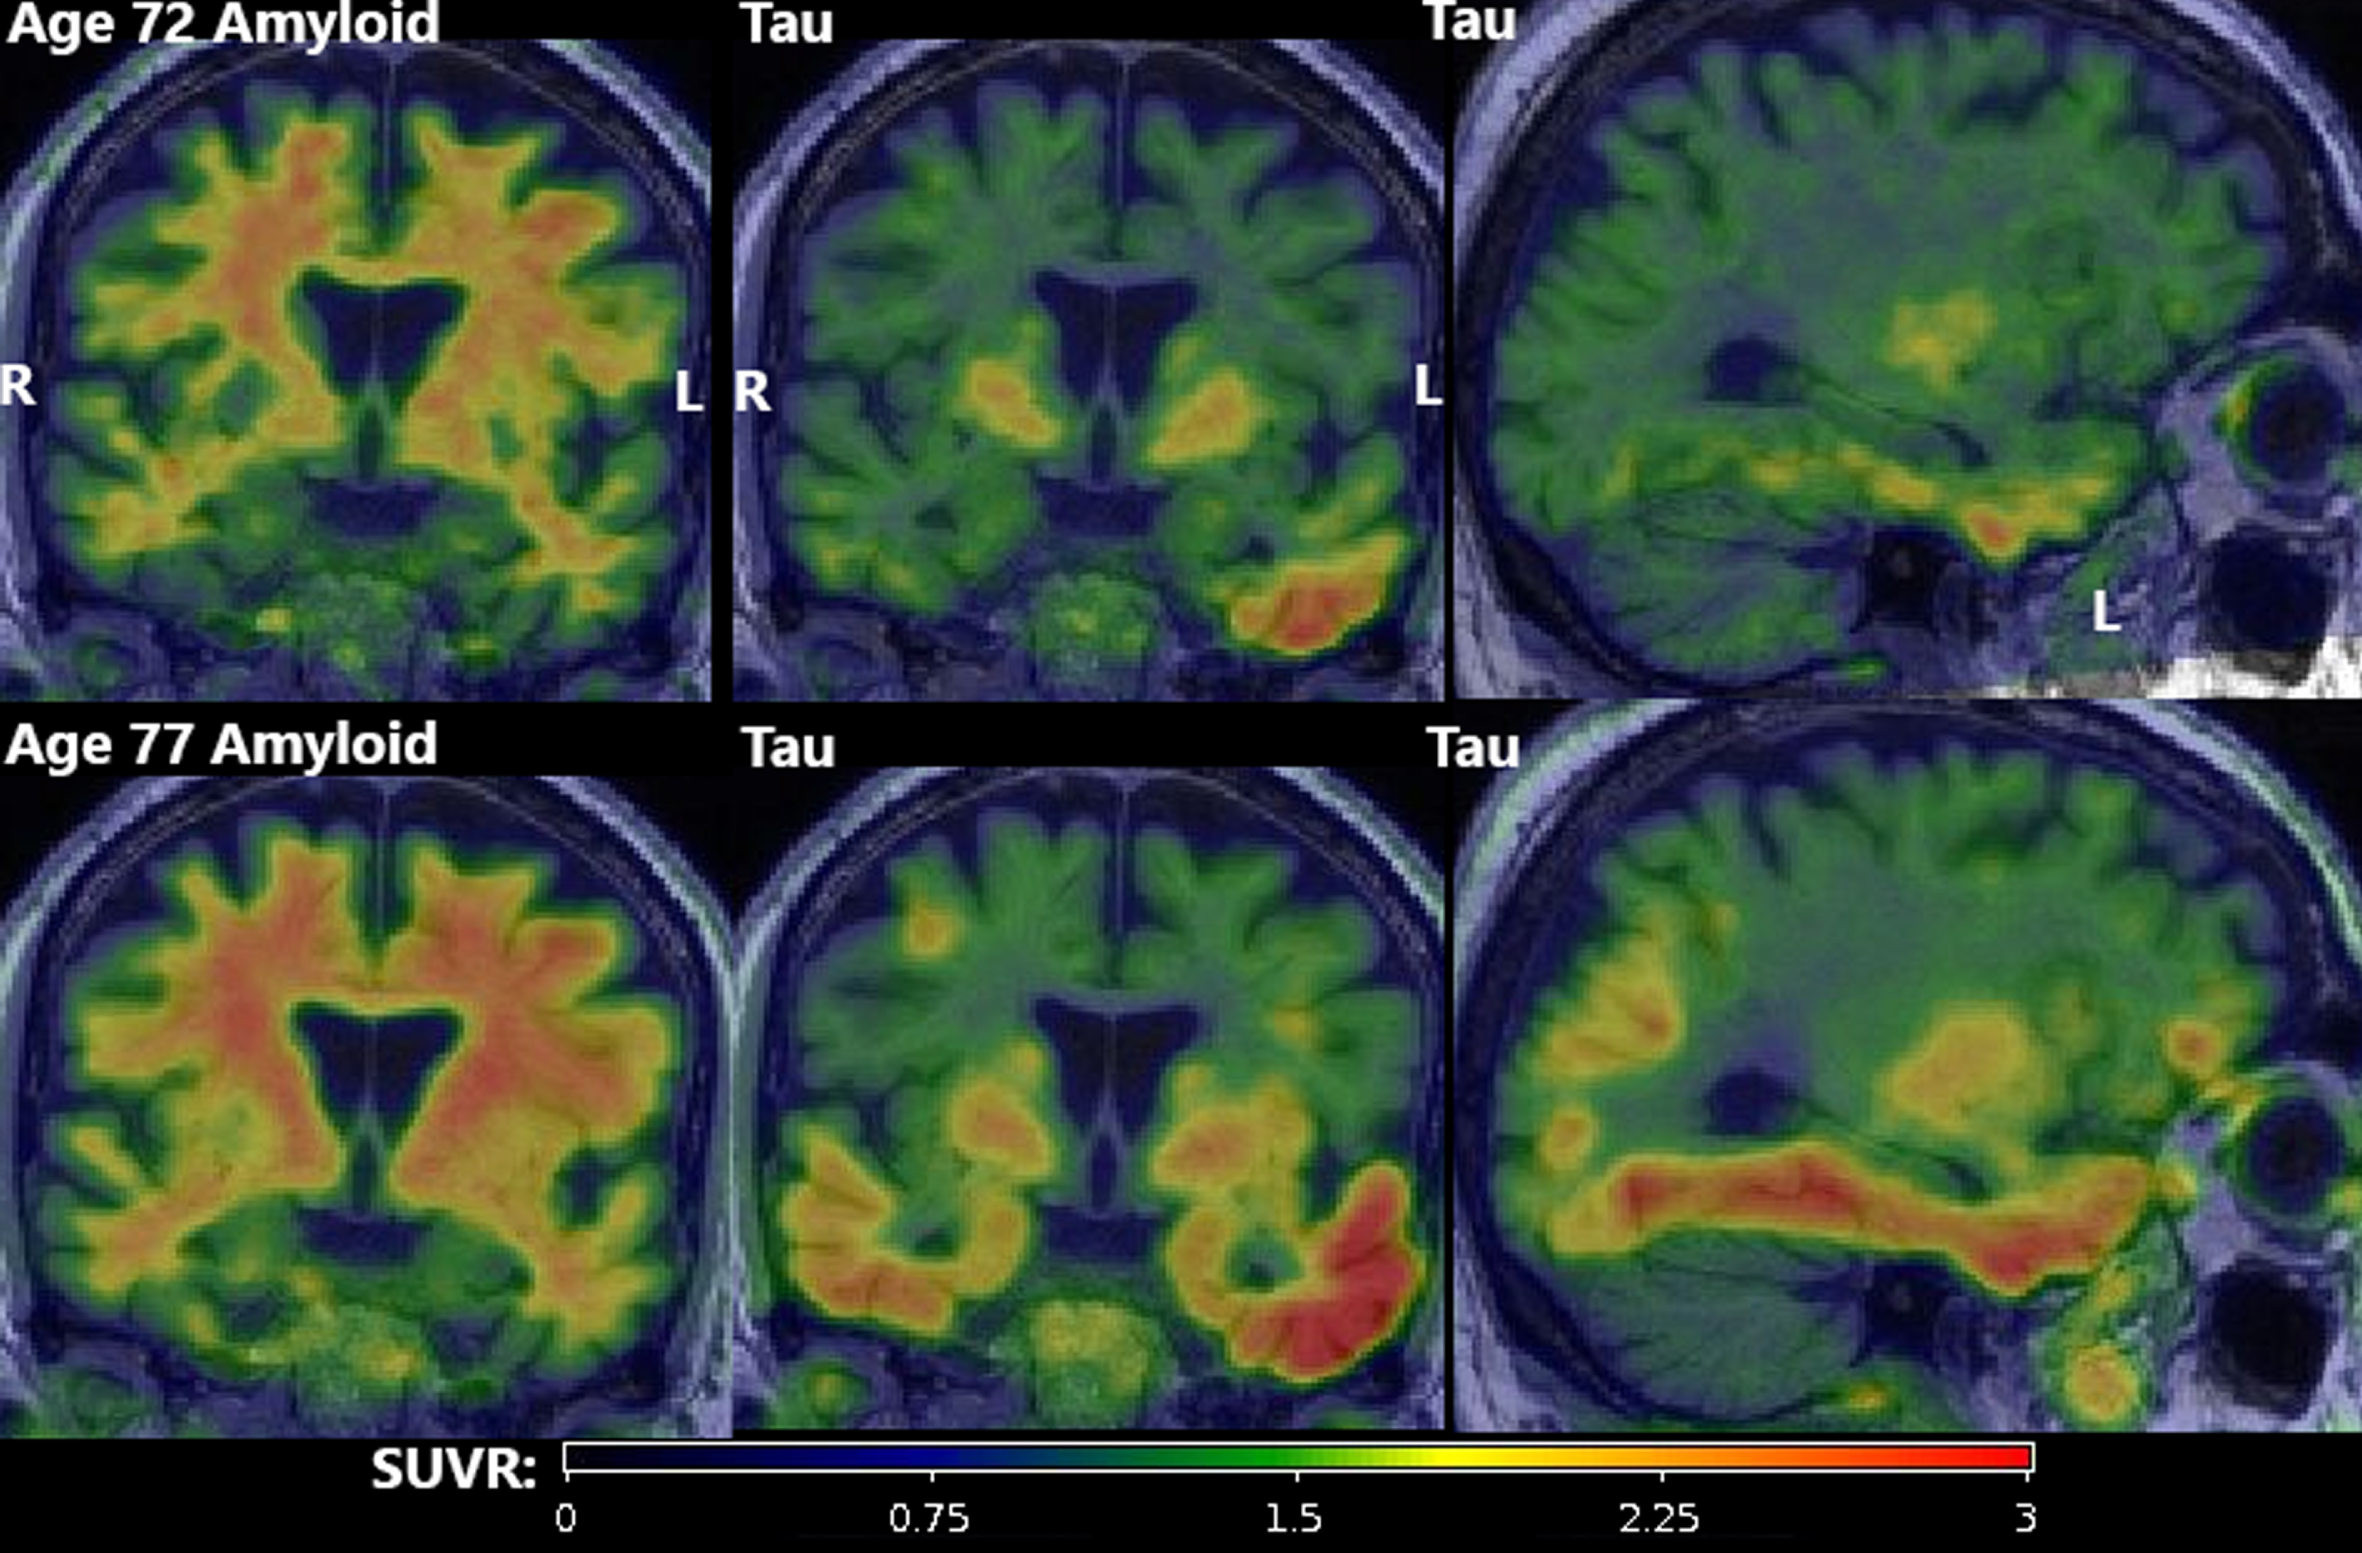 PET findings. Amyloid (first column; PiB) and tau PET (second two columns; Flortaucipir) at age 72 (top row) and age 77 (bottom row). All amyloid scans were visually negative (A–) despite quantitative elevation due to substantial but age-expected off-target binding in adjacent WM. Tau scans showed atypically high suprathreshold (T+) signal in an asymmetric (L > R) pattern primarily in the temporal lobe with focal uptake in the frontal, parietal, and occipital lobes. All scans were of good quality and all potential technical explanations for the atypically elevated signal (e.g., motion, attenuation correction error, misregistration) were excluded.